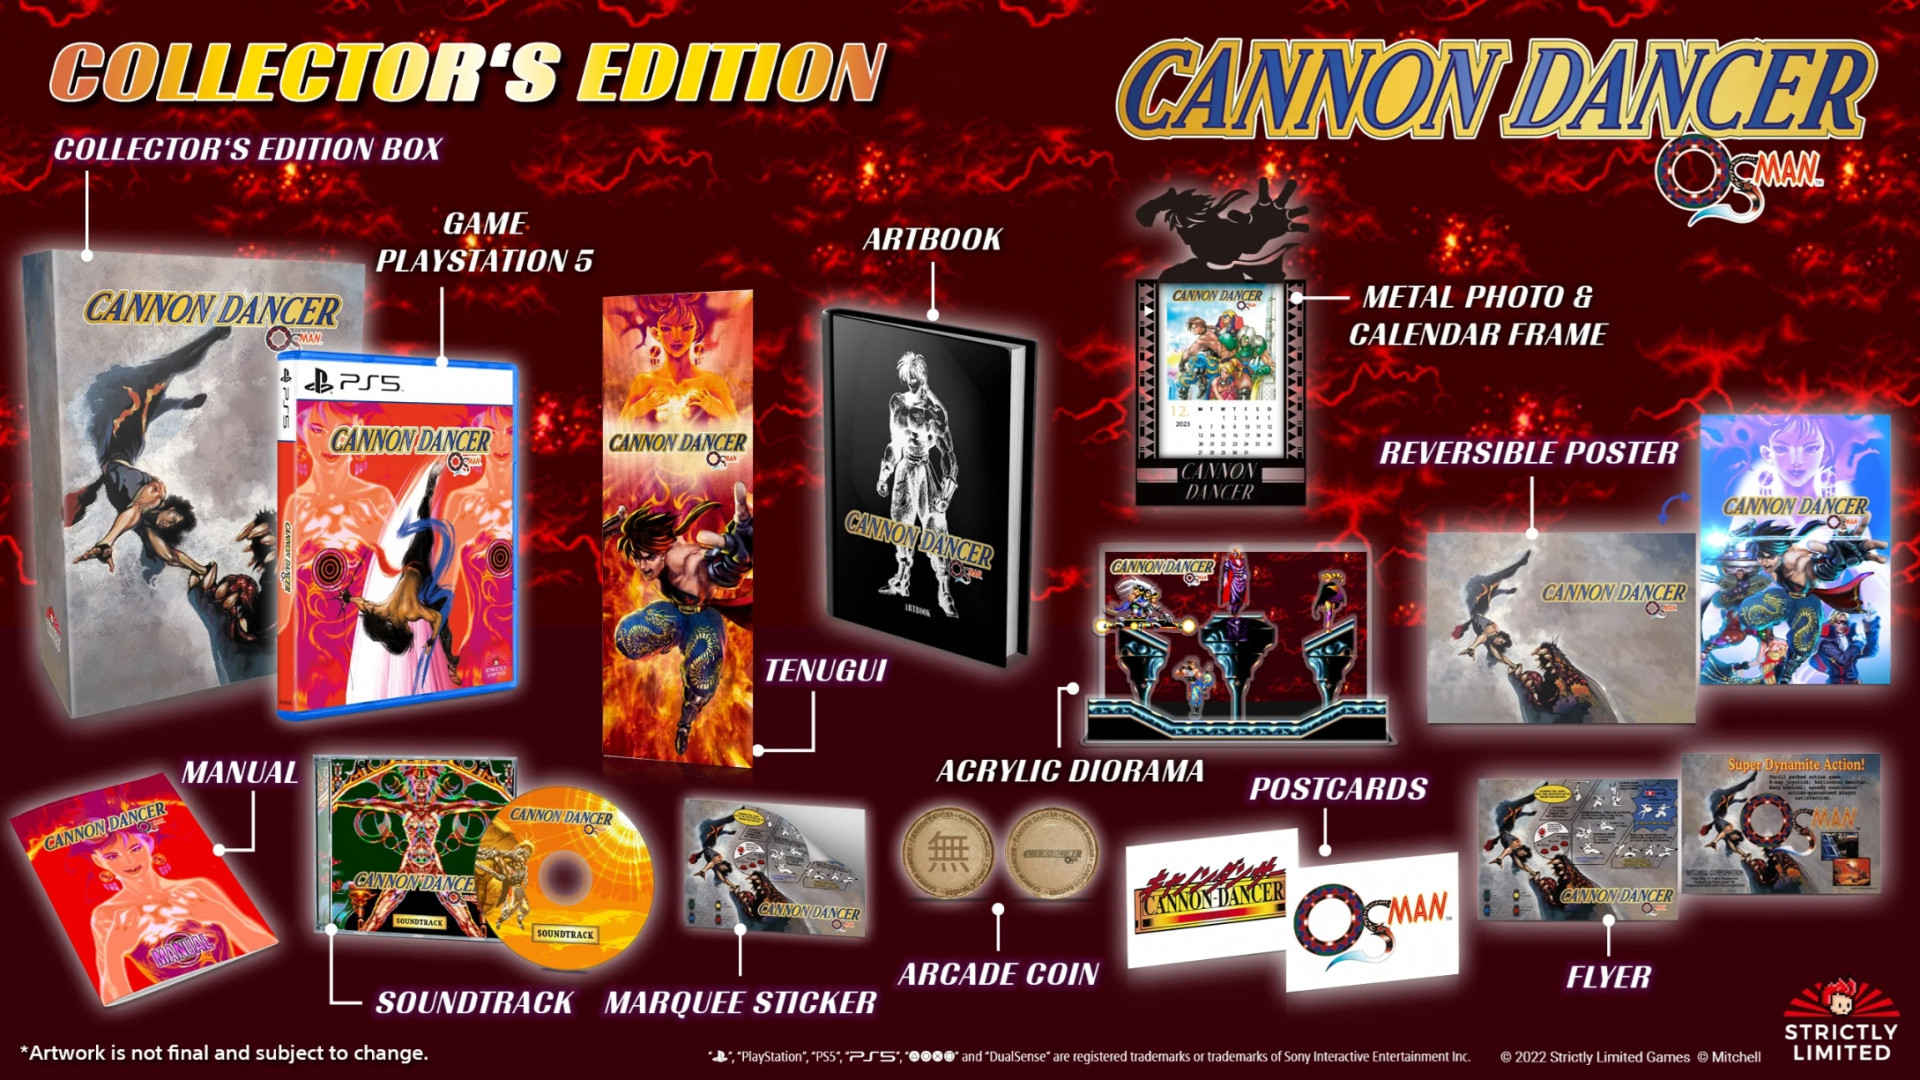 Cannon Dancer: Osman - Collector's Edition (Strictly Limited) (PS5), Atlus